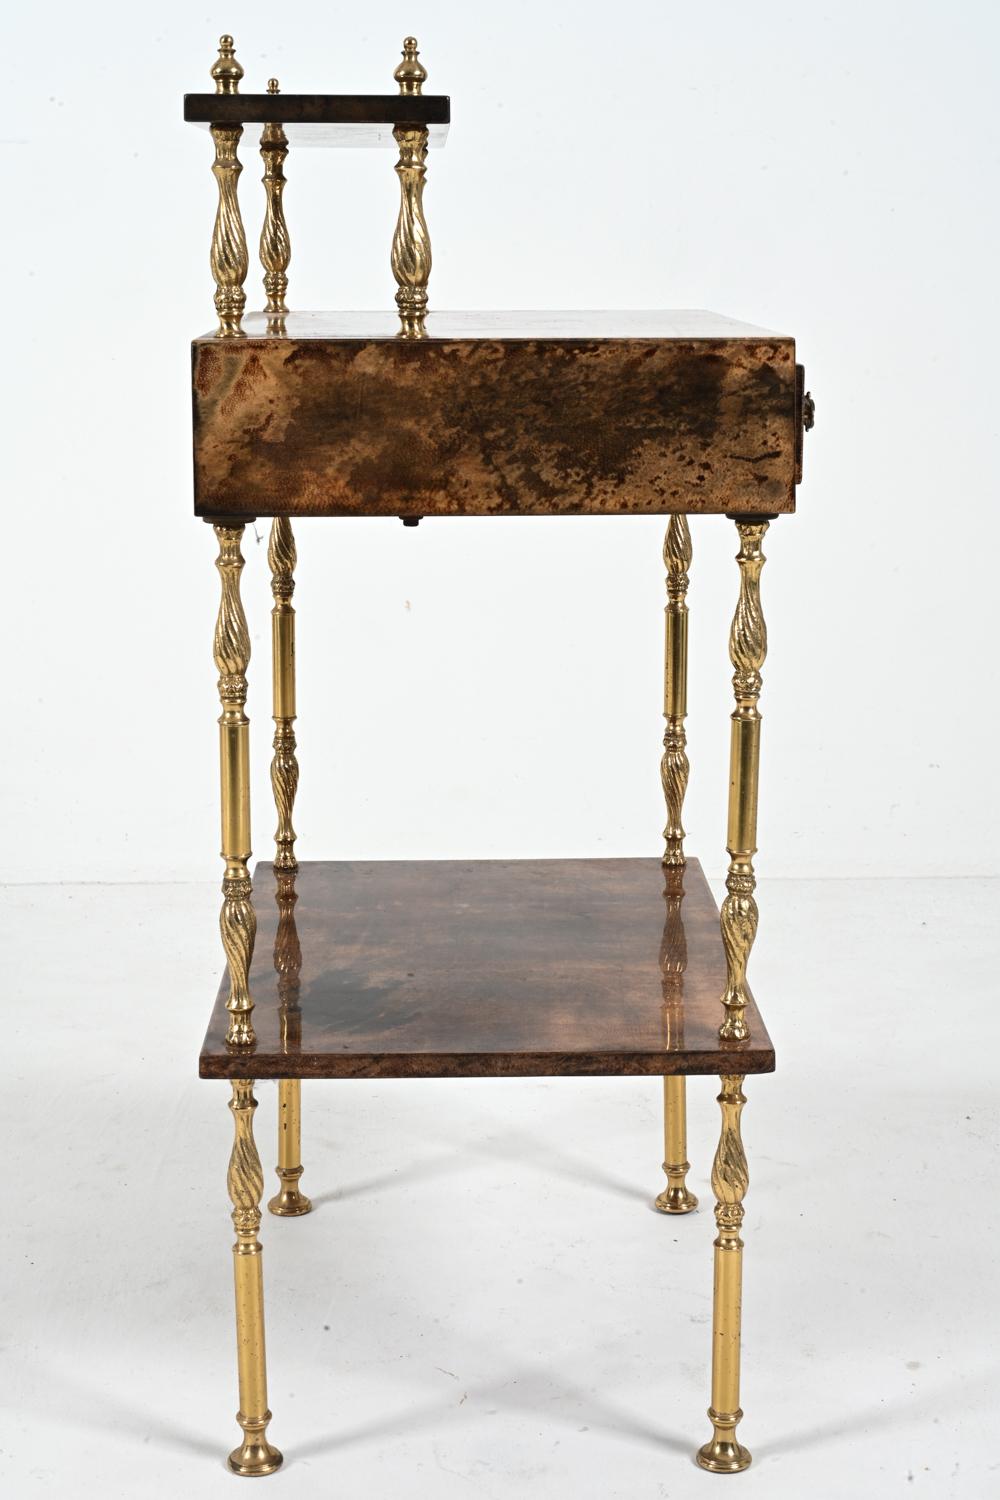 Aldo Tura Lacquered Goatskin & Brass Occasional Table, c. 1960's For Sale 11